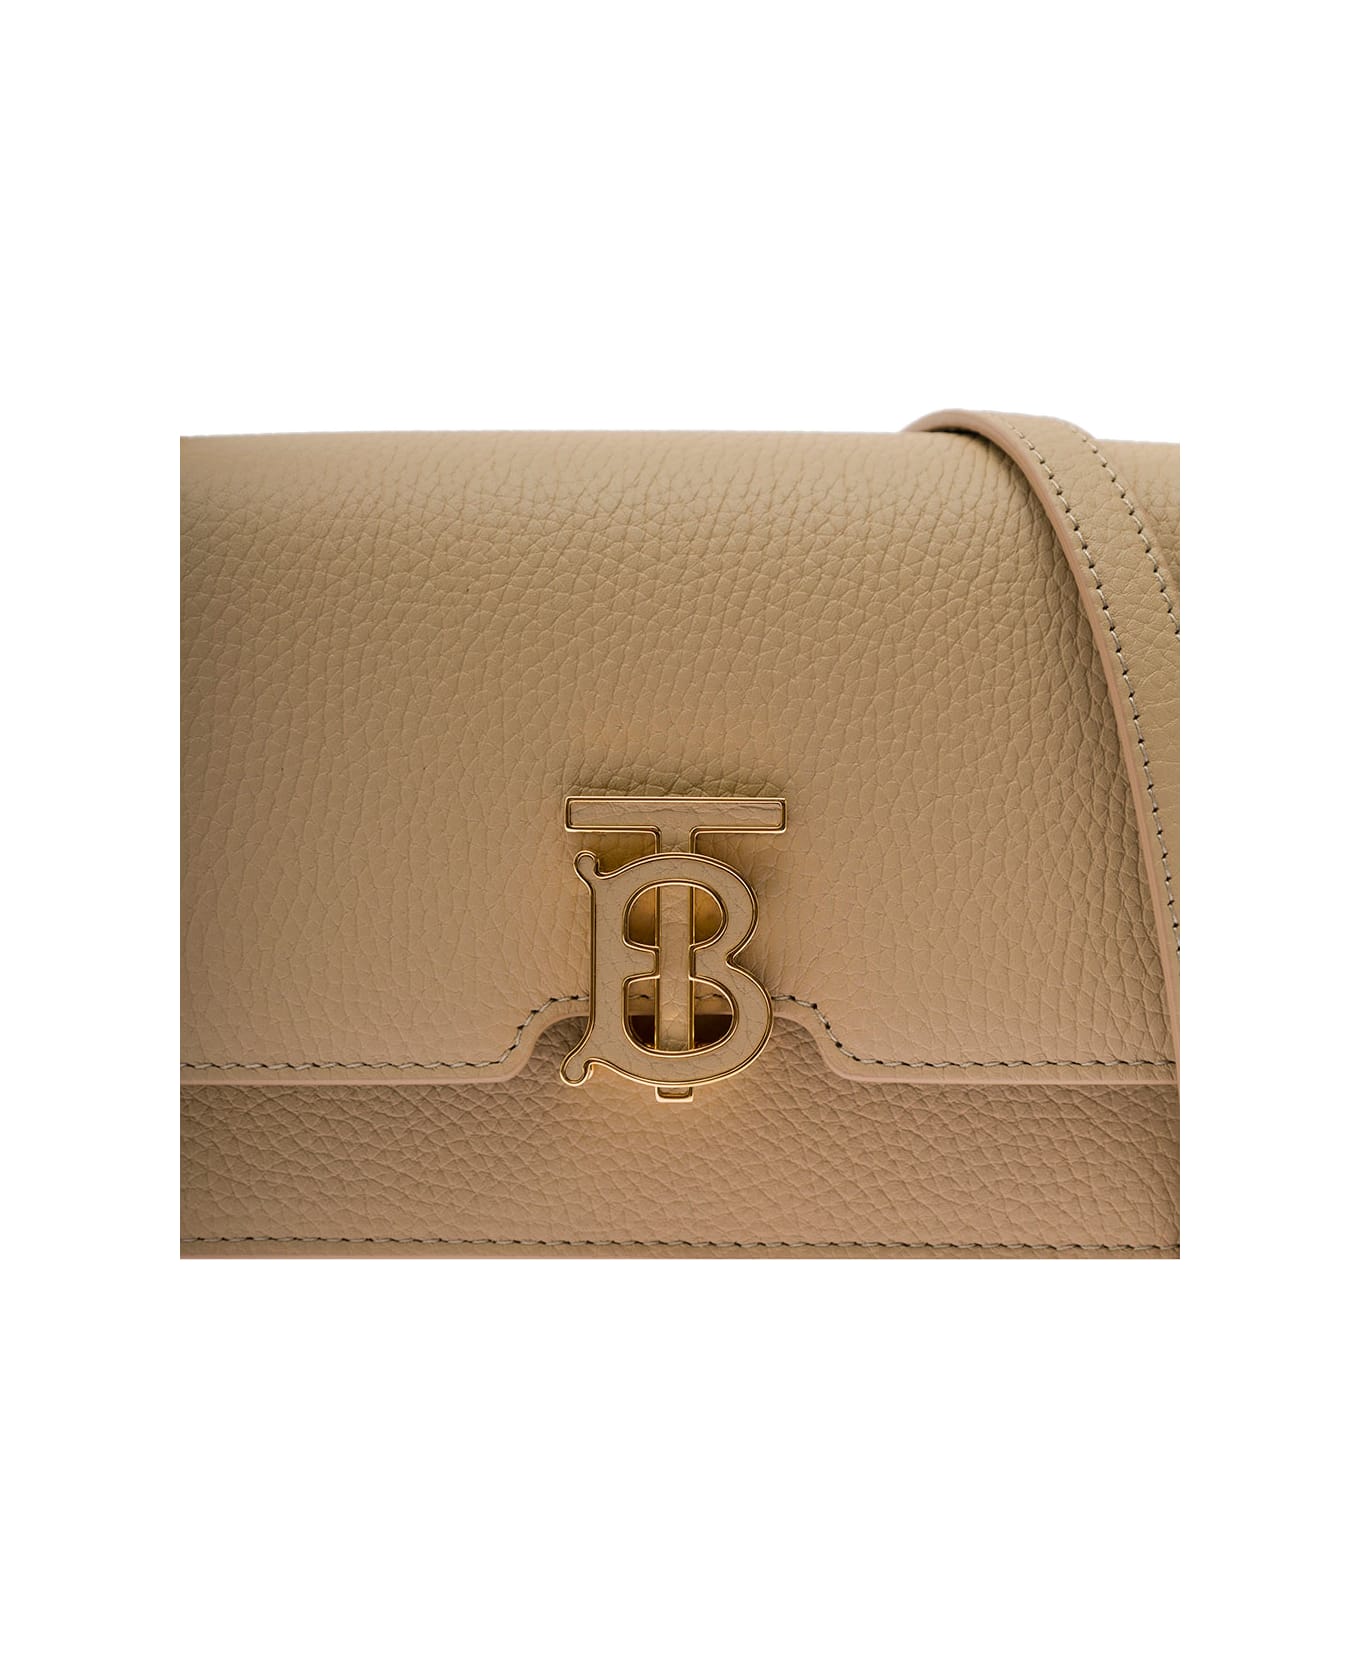 Burberry Beige Shoulder Bag With Tonal Tb Logo In Grainy Leather Woman - Nude & Neutrals ショルダーバッグ